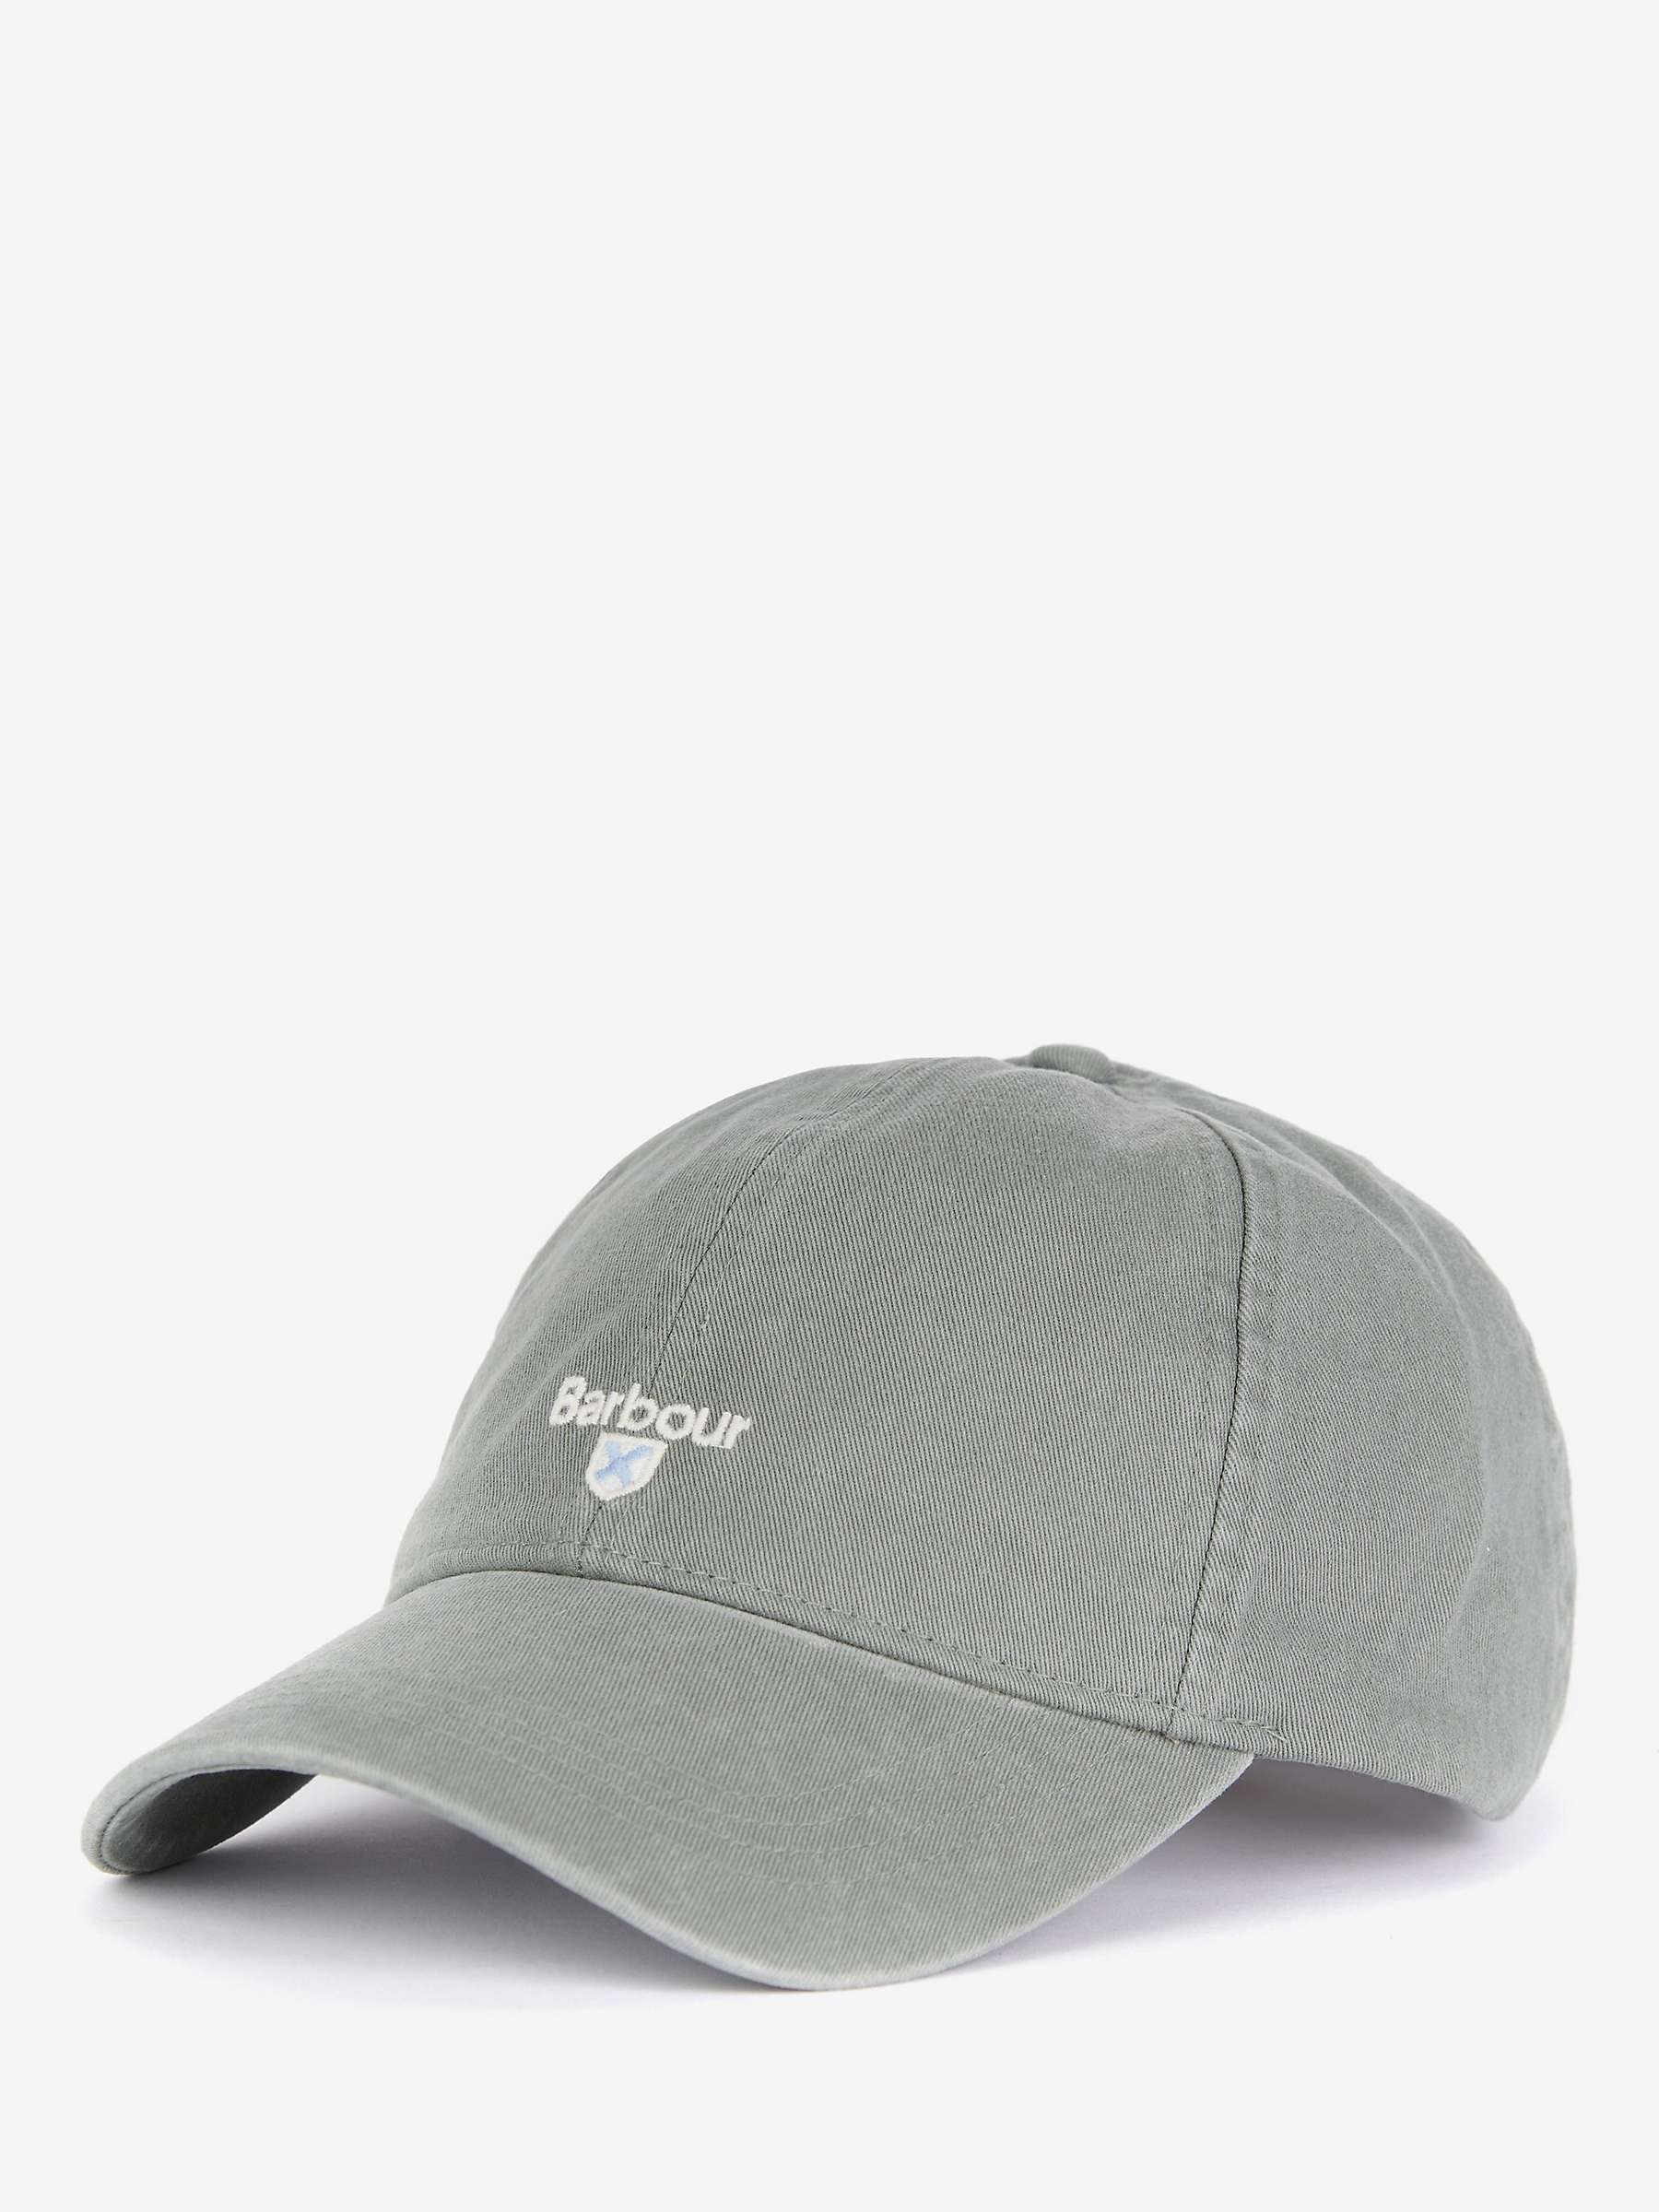 Buy Barbour Cascade Sports Cap, Agave Green Online at johnlewis.com